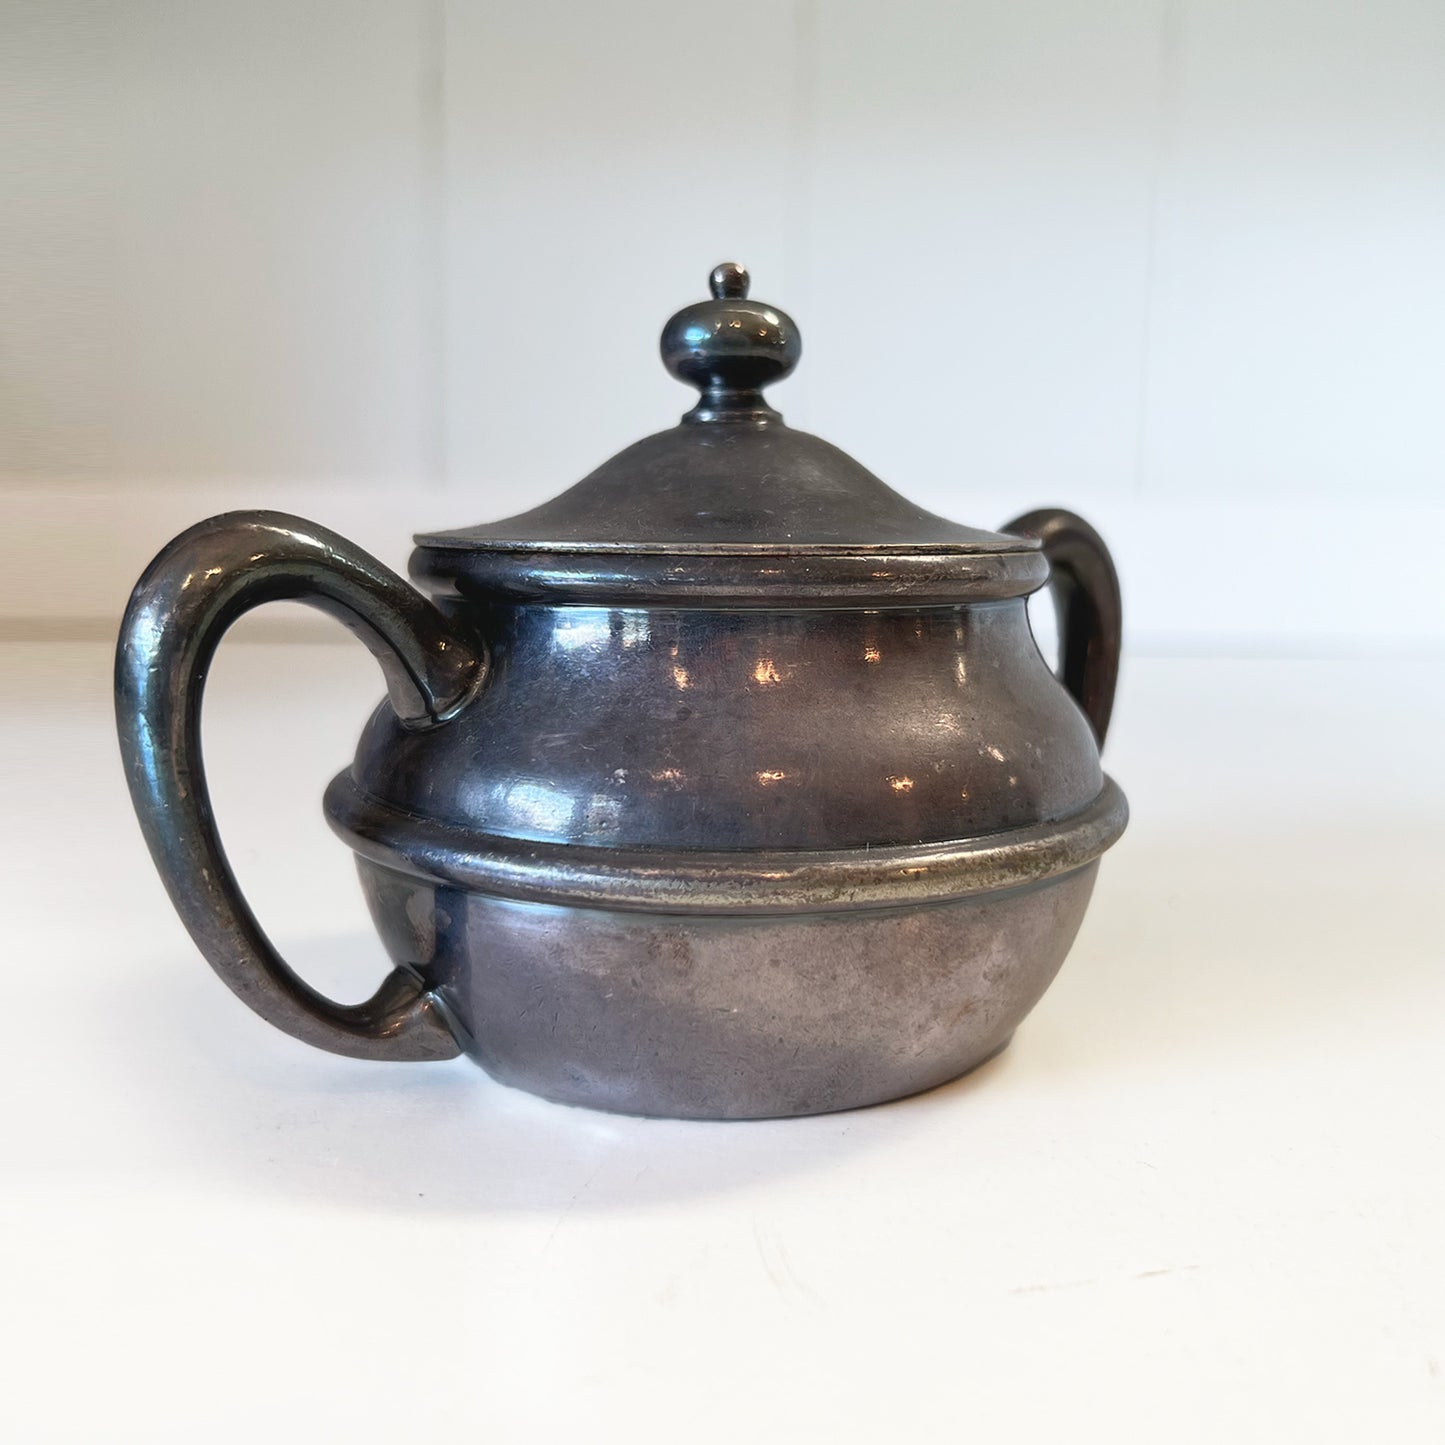 Quaint and tarnished vintage silver sugar bowl with lid, featuring neatly soldered handles, shown in a 3/4 side view